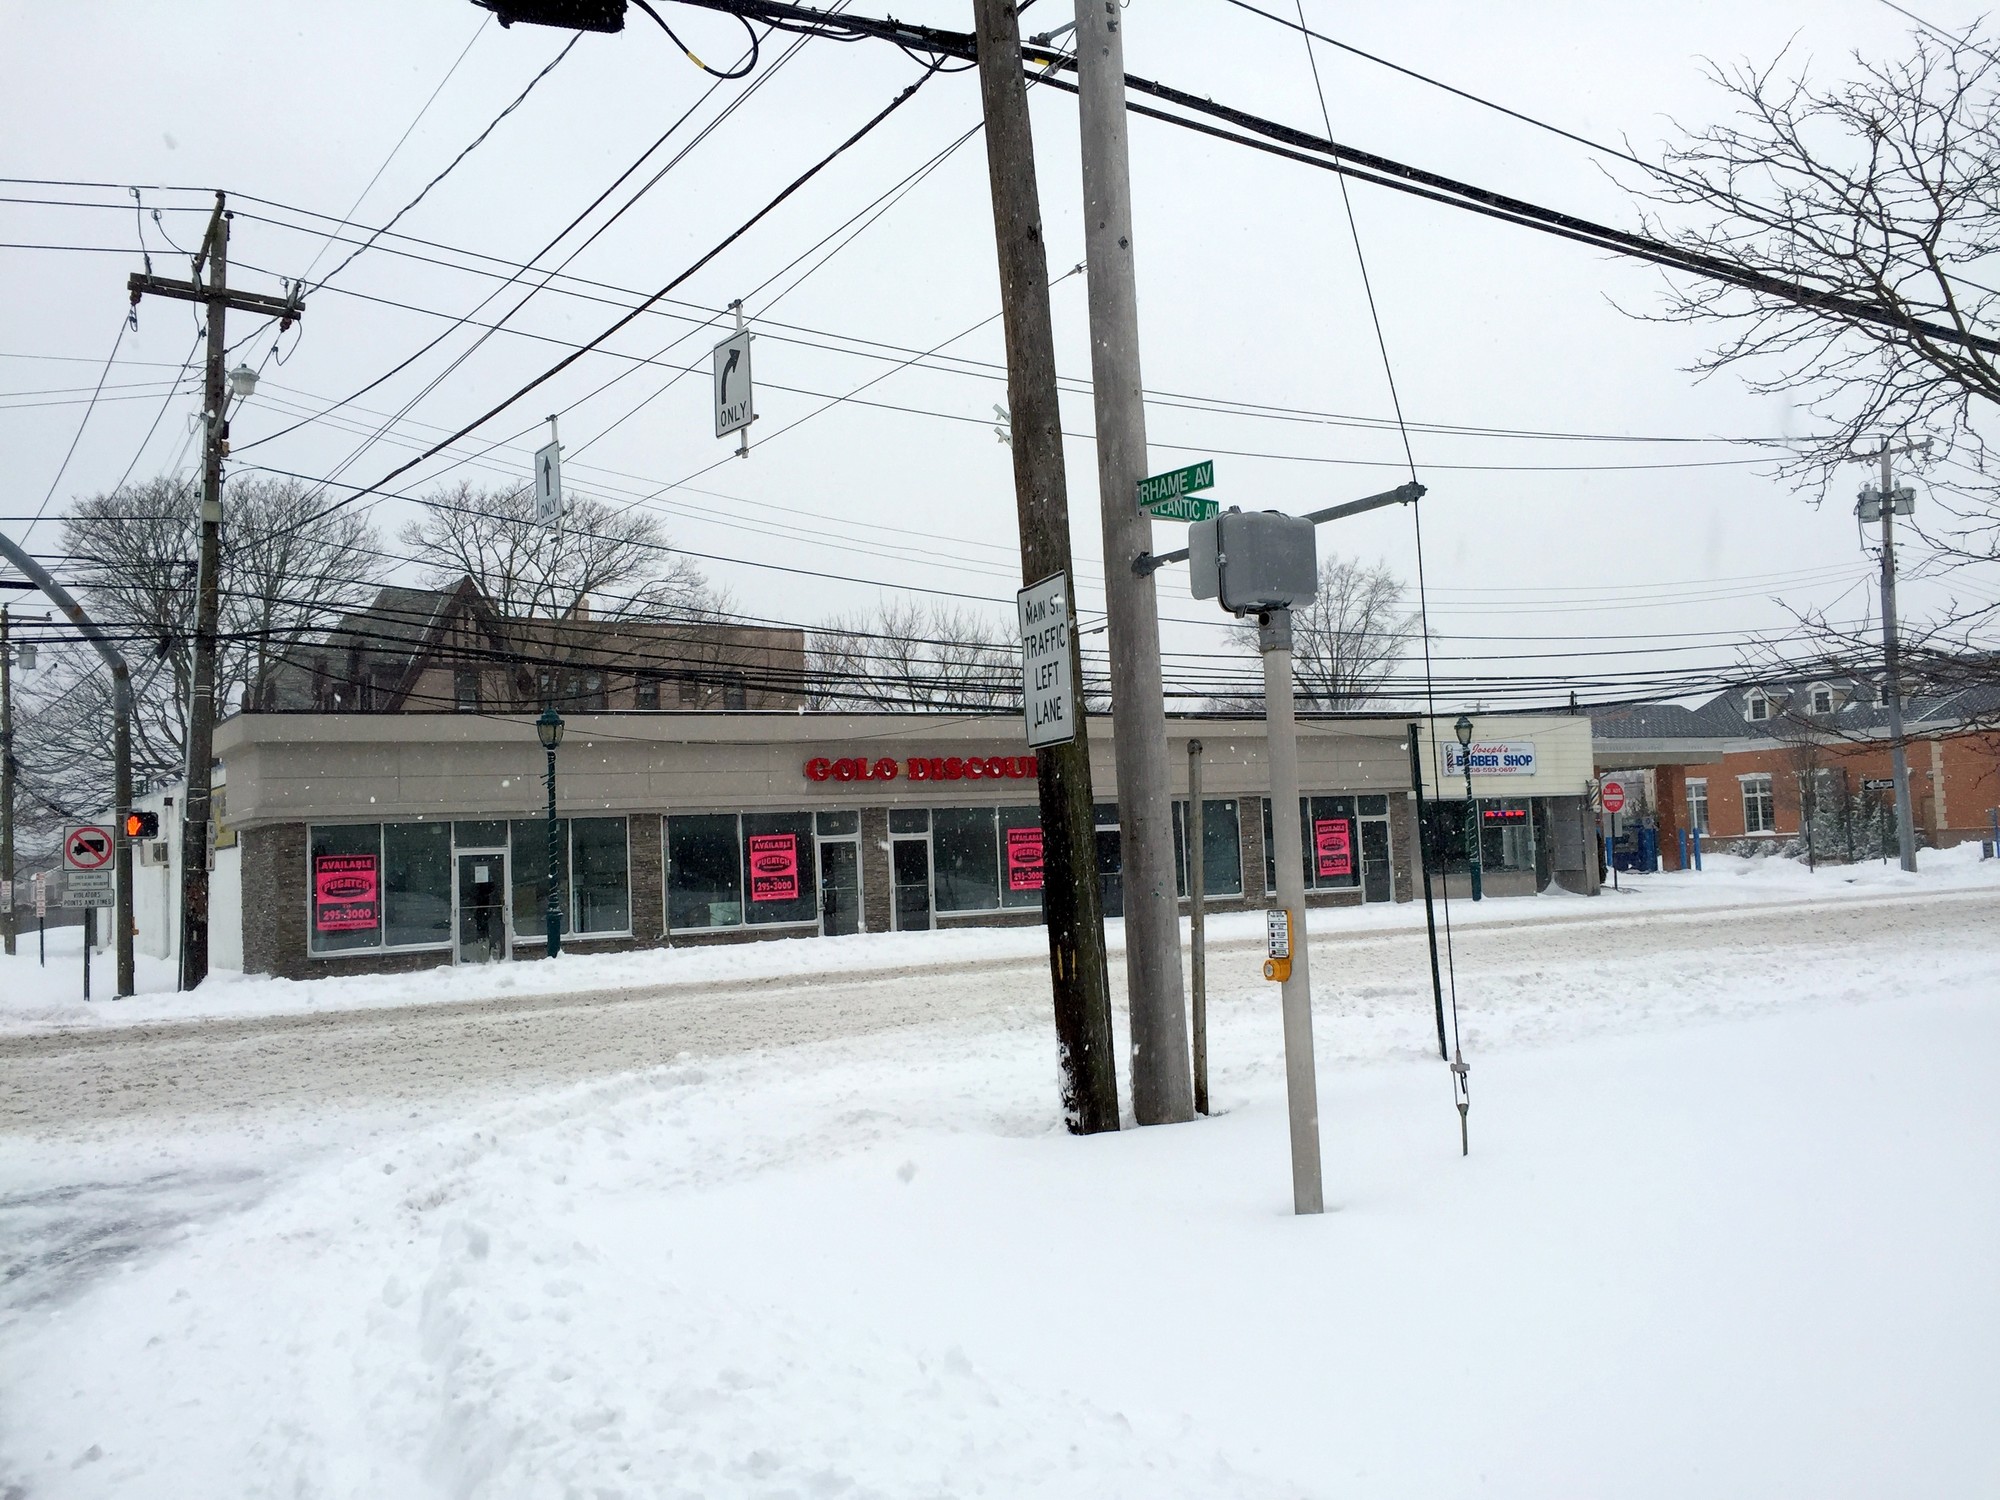 Main Street in East Rockaway was deserted at 10 a.m. as the snow blew.